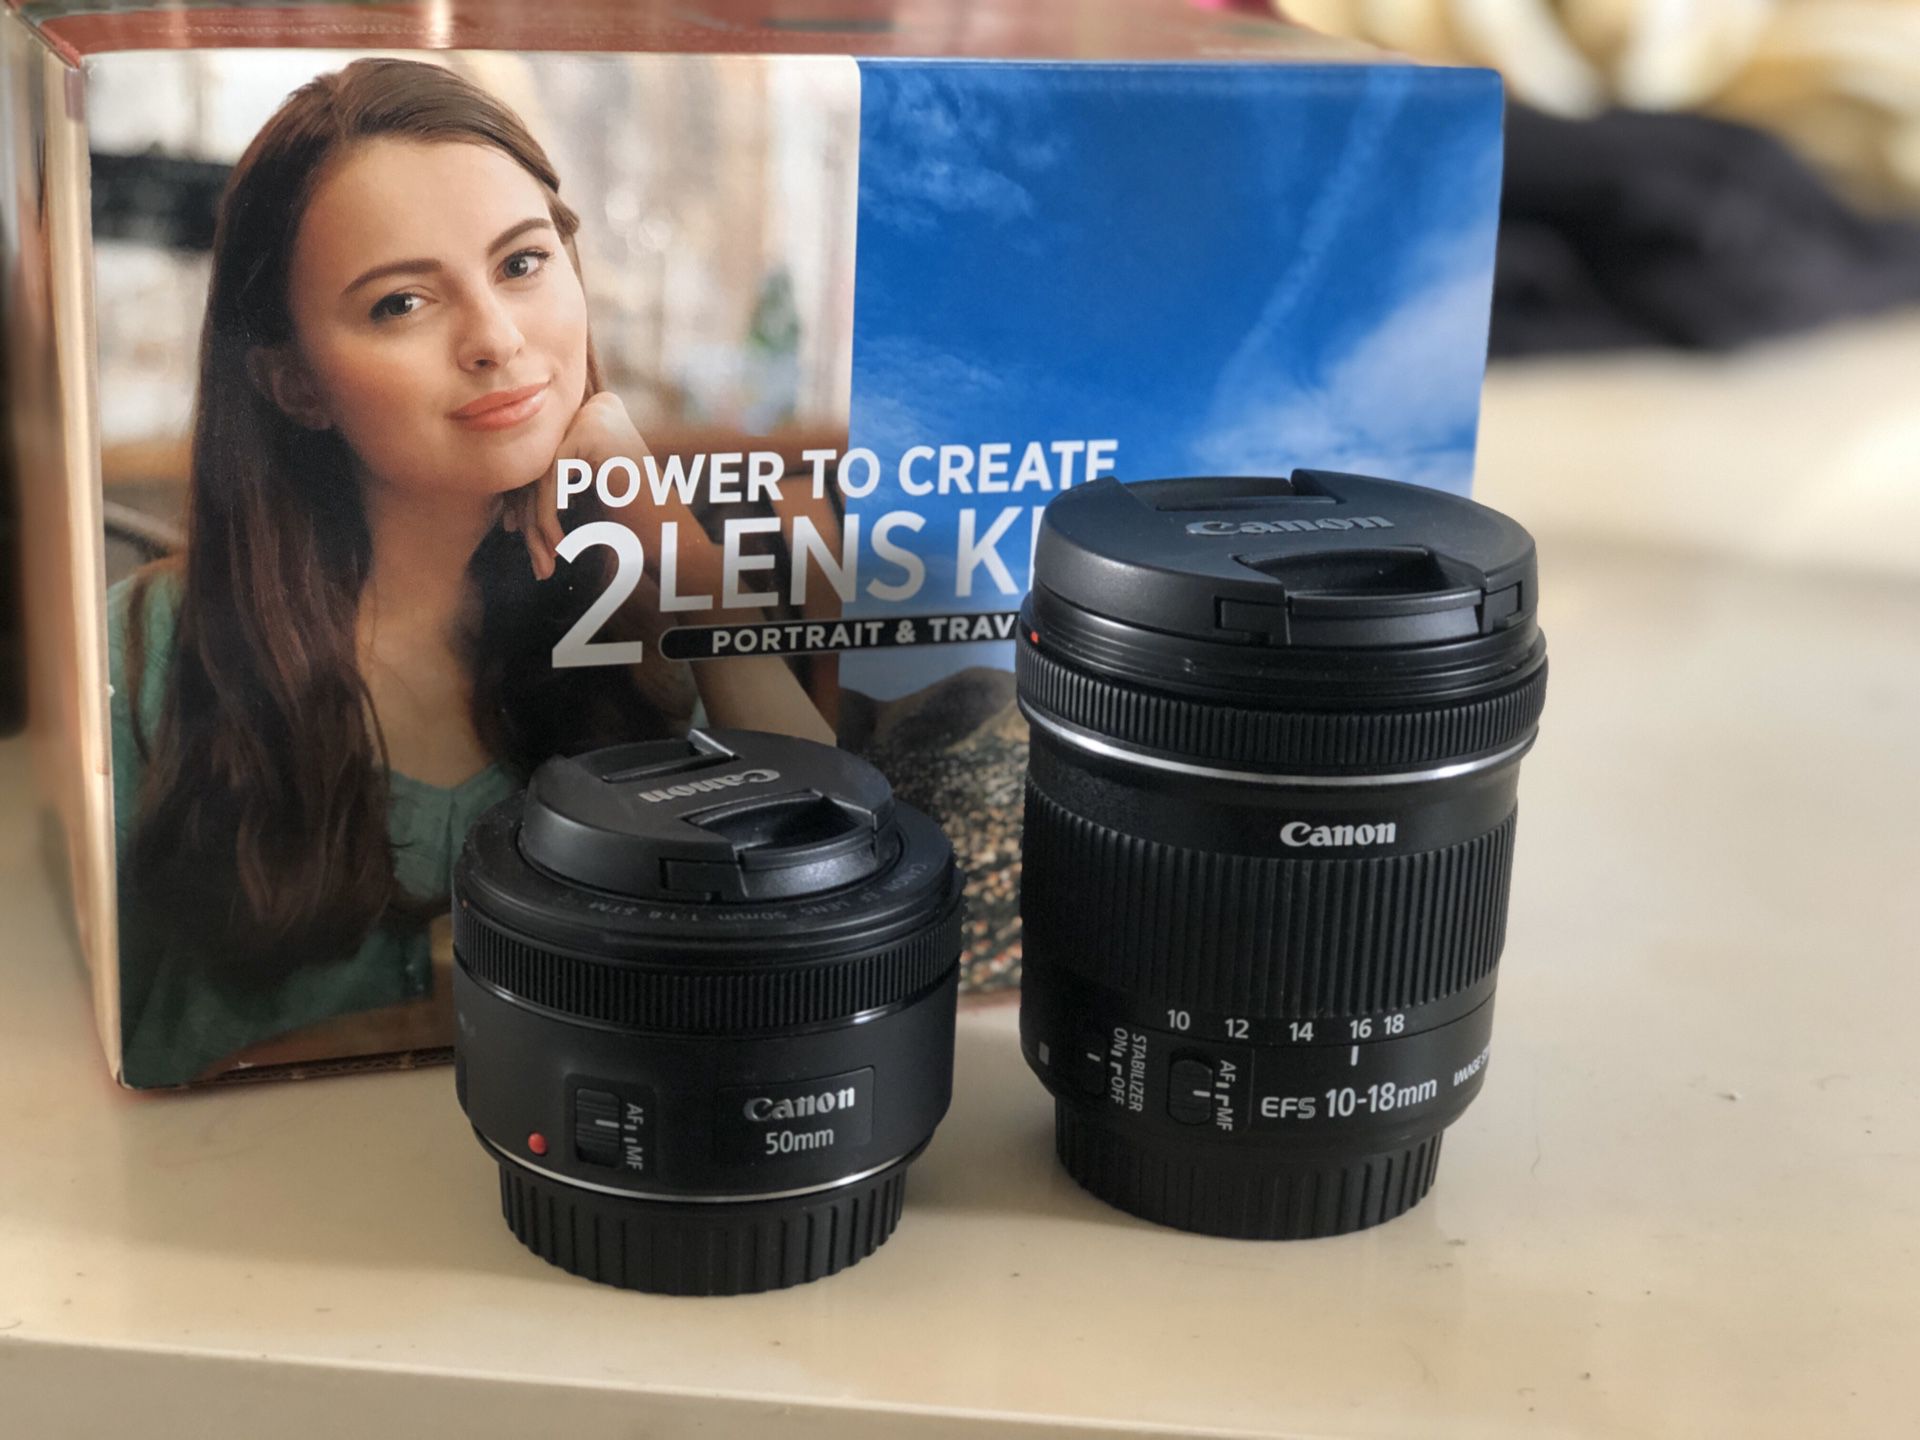 Canon 50mm and 10-18mm lens kit